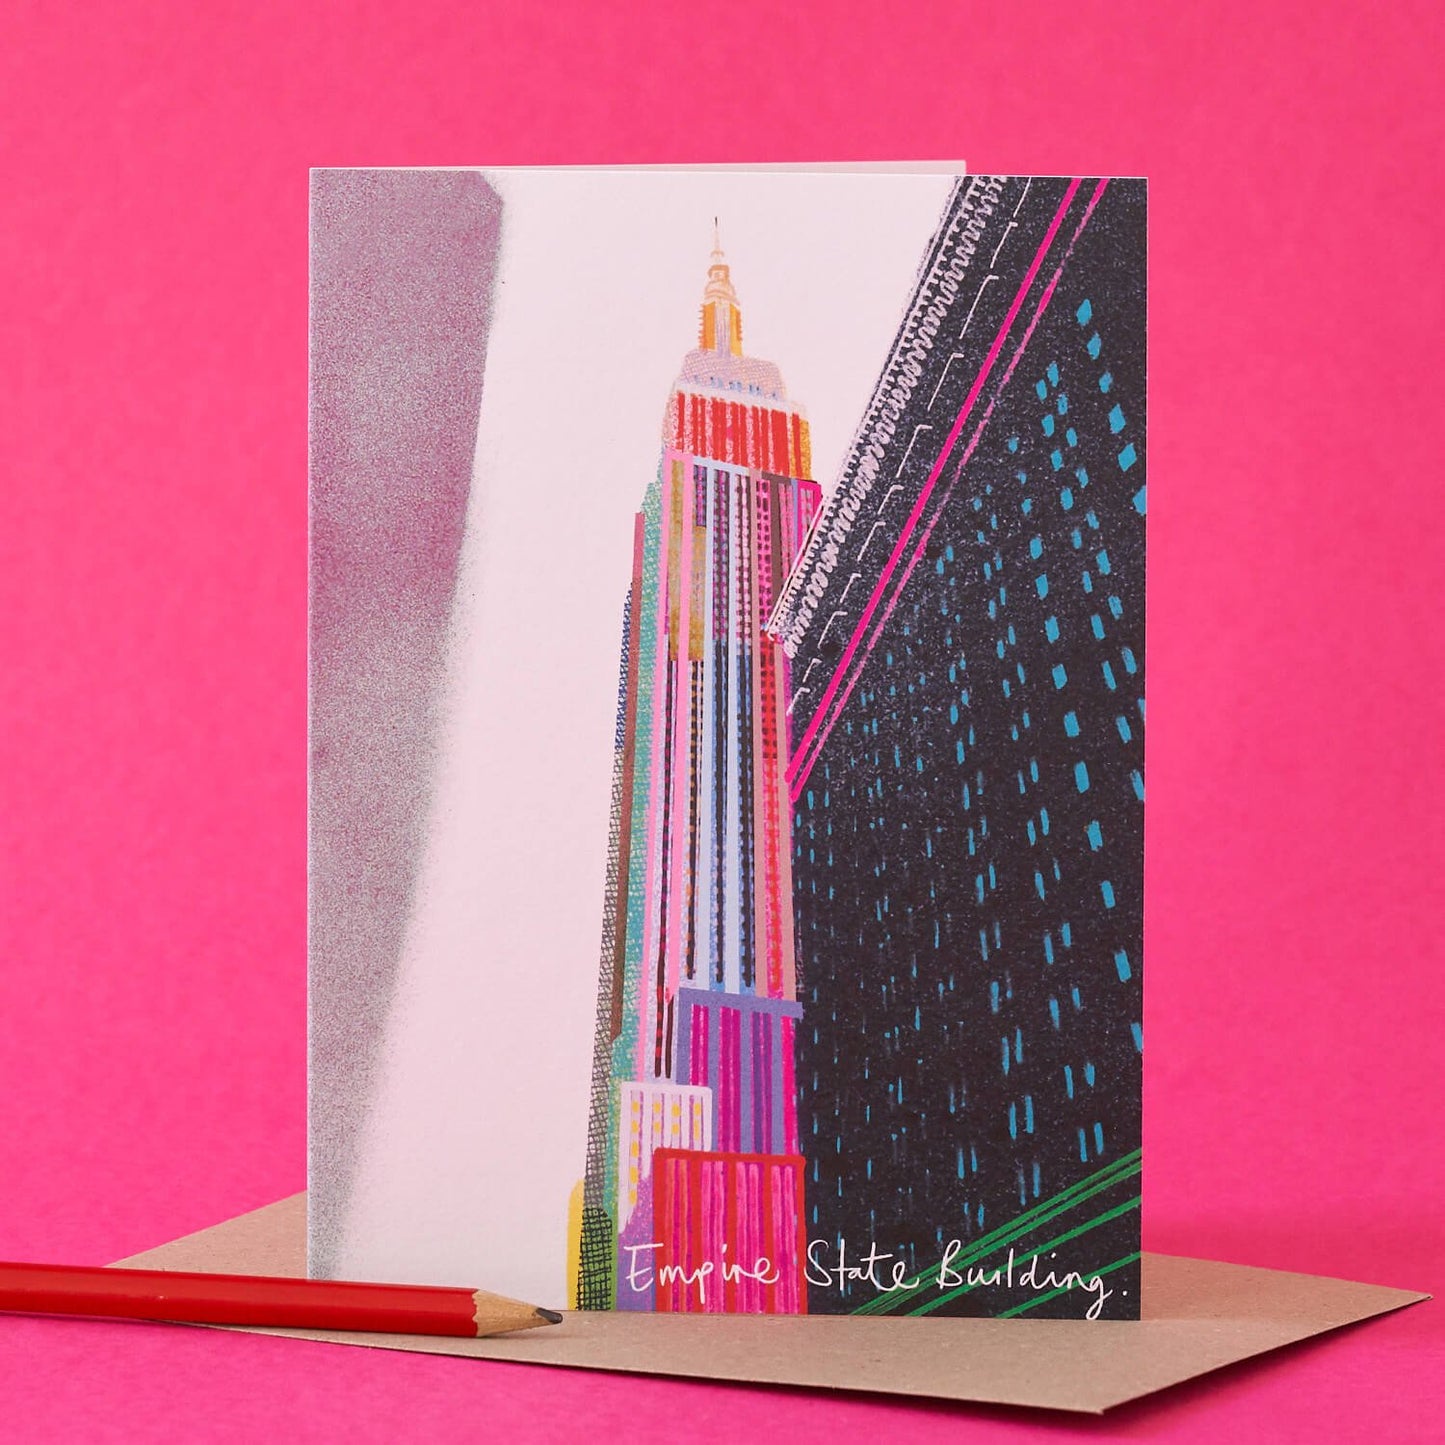 EMPIRE STATE BUILDING CARD